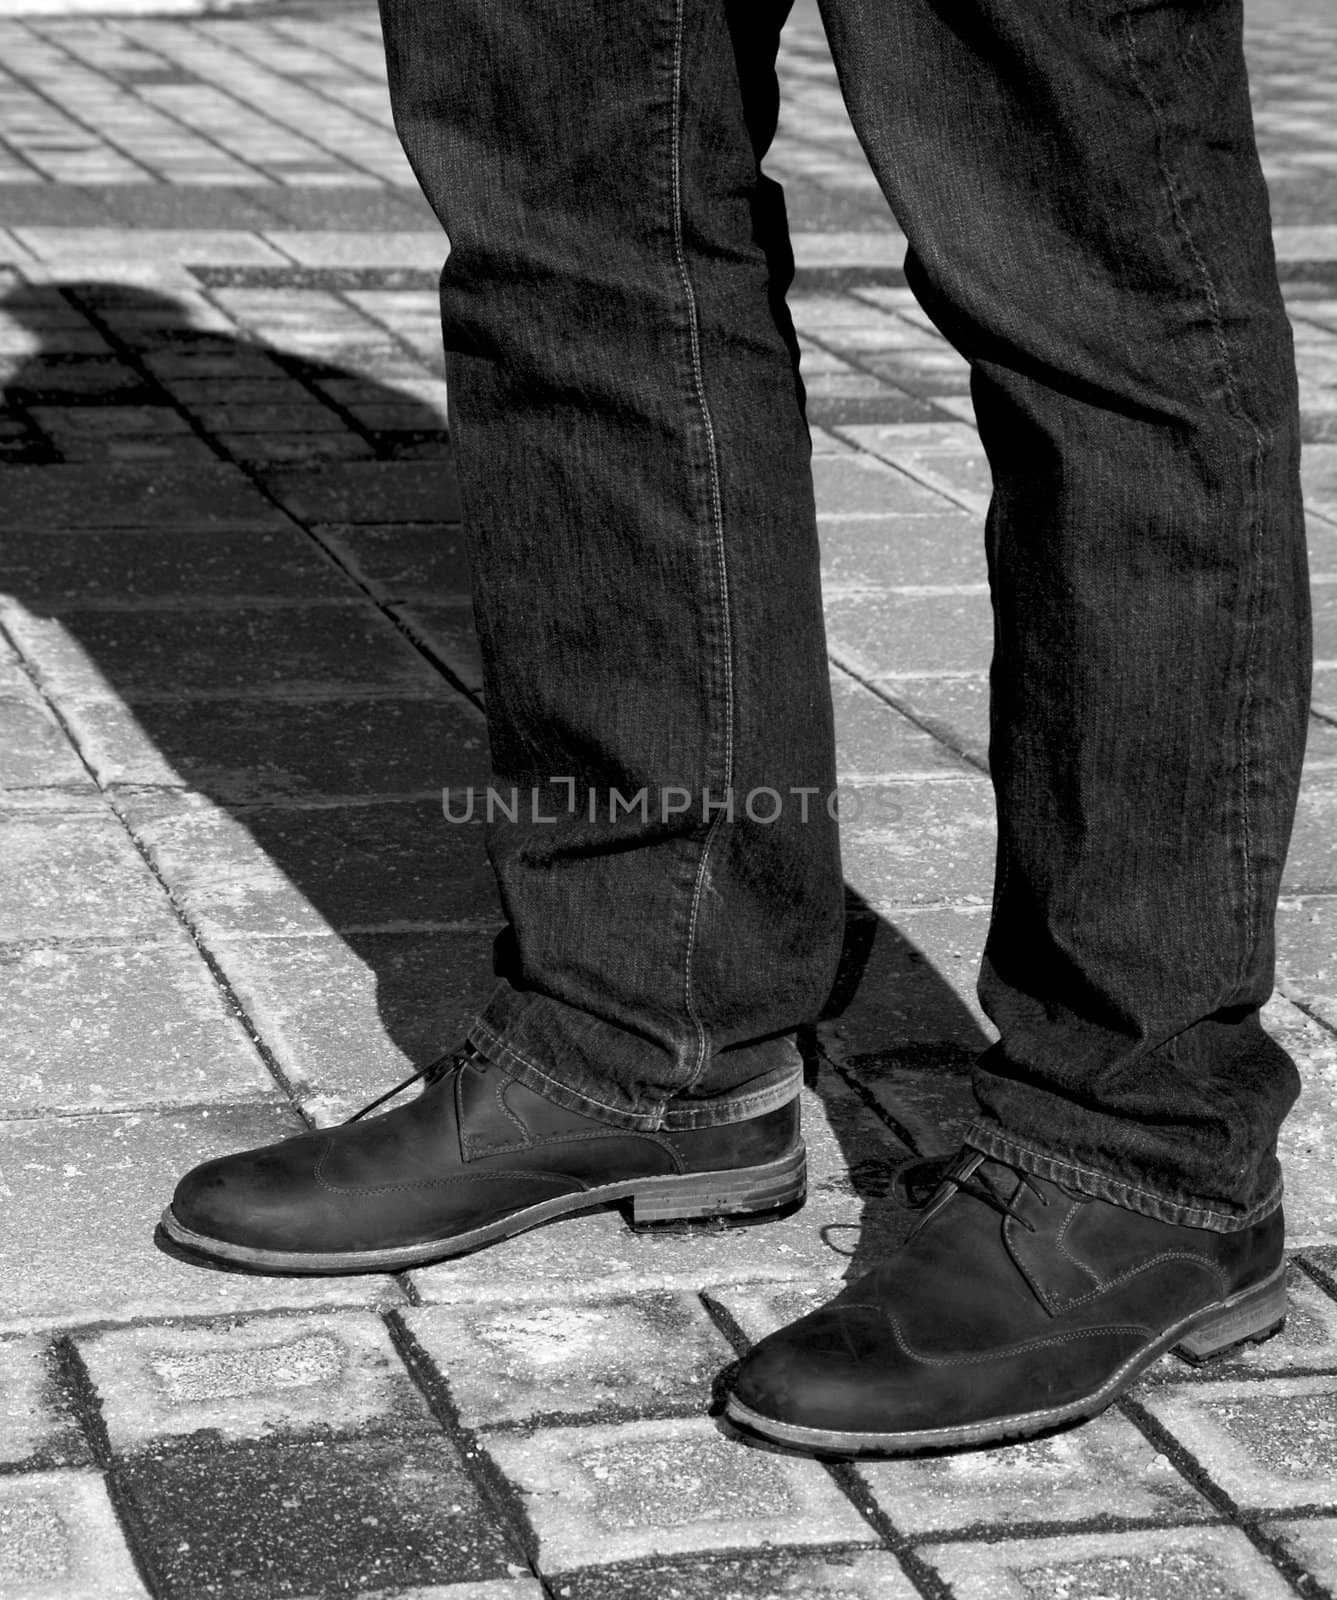 Monochrome Dress Shoes and Jeans